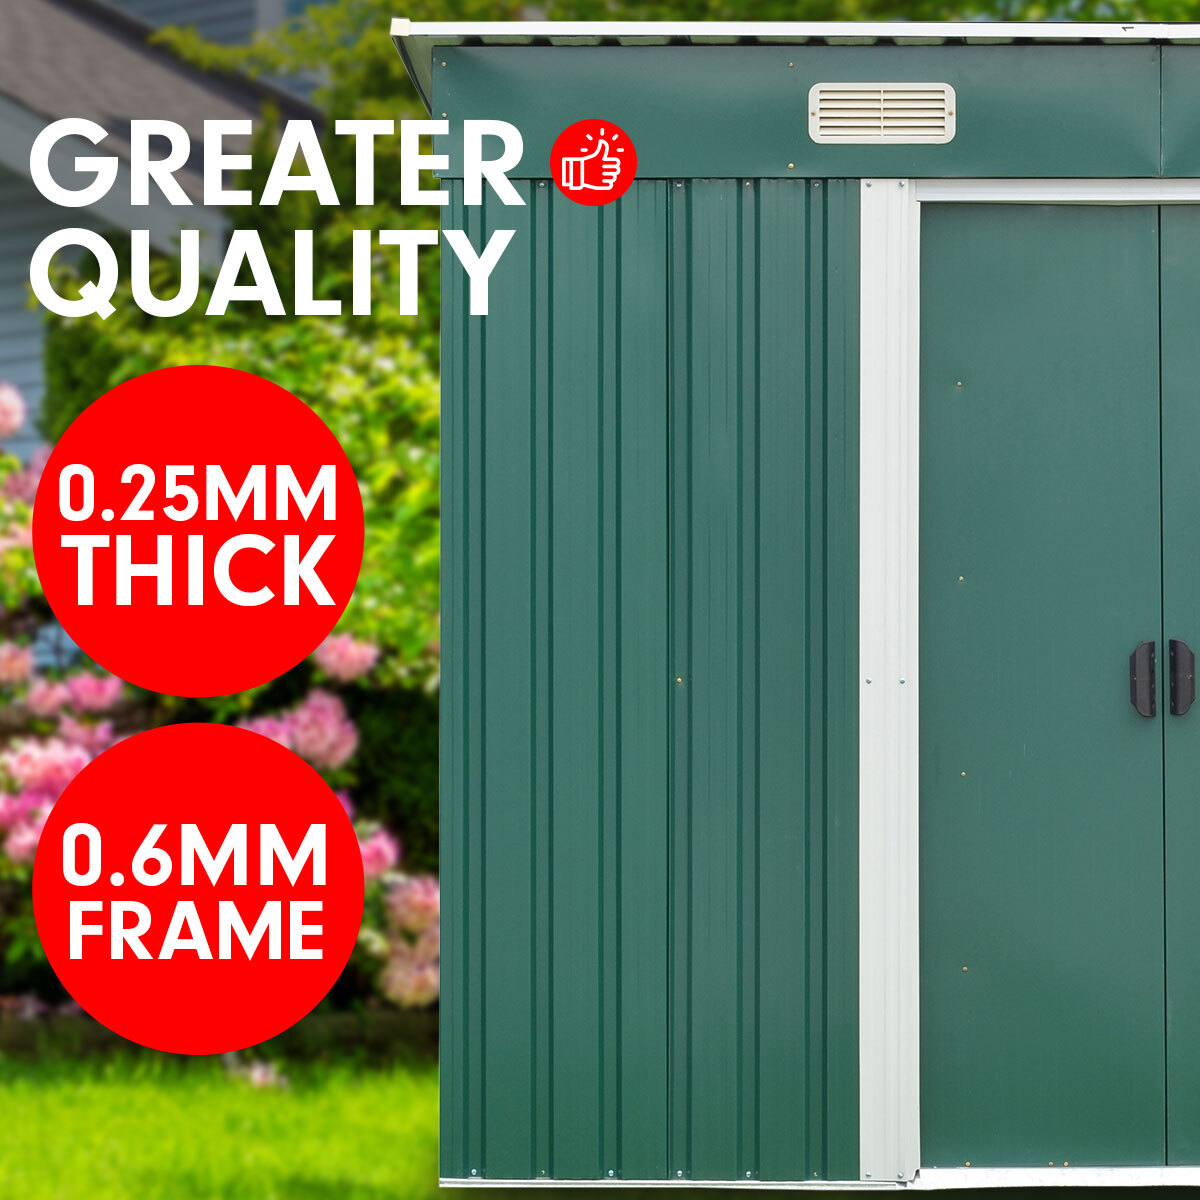 Garden Shed with Base Flat Roof Outdoor Storage – 131 x 238 x 182 cm, Green